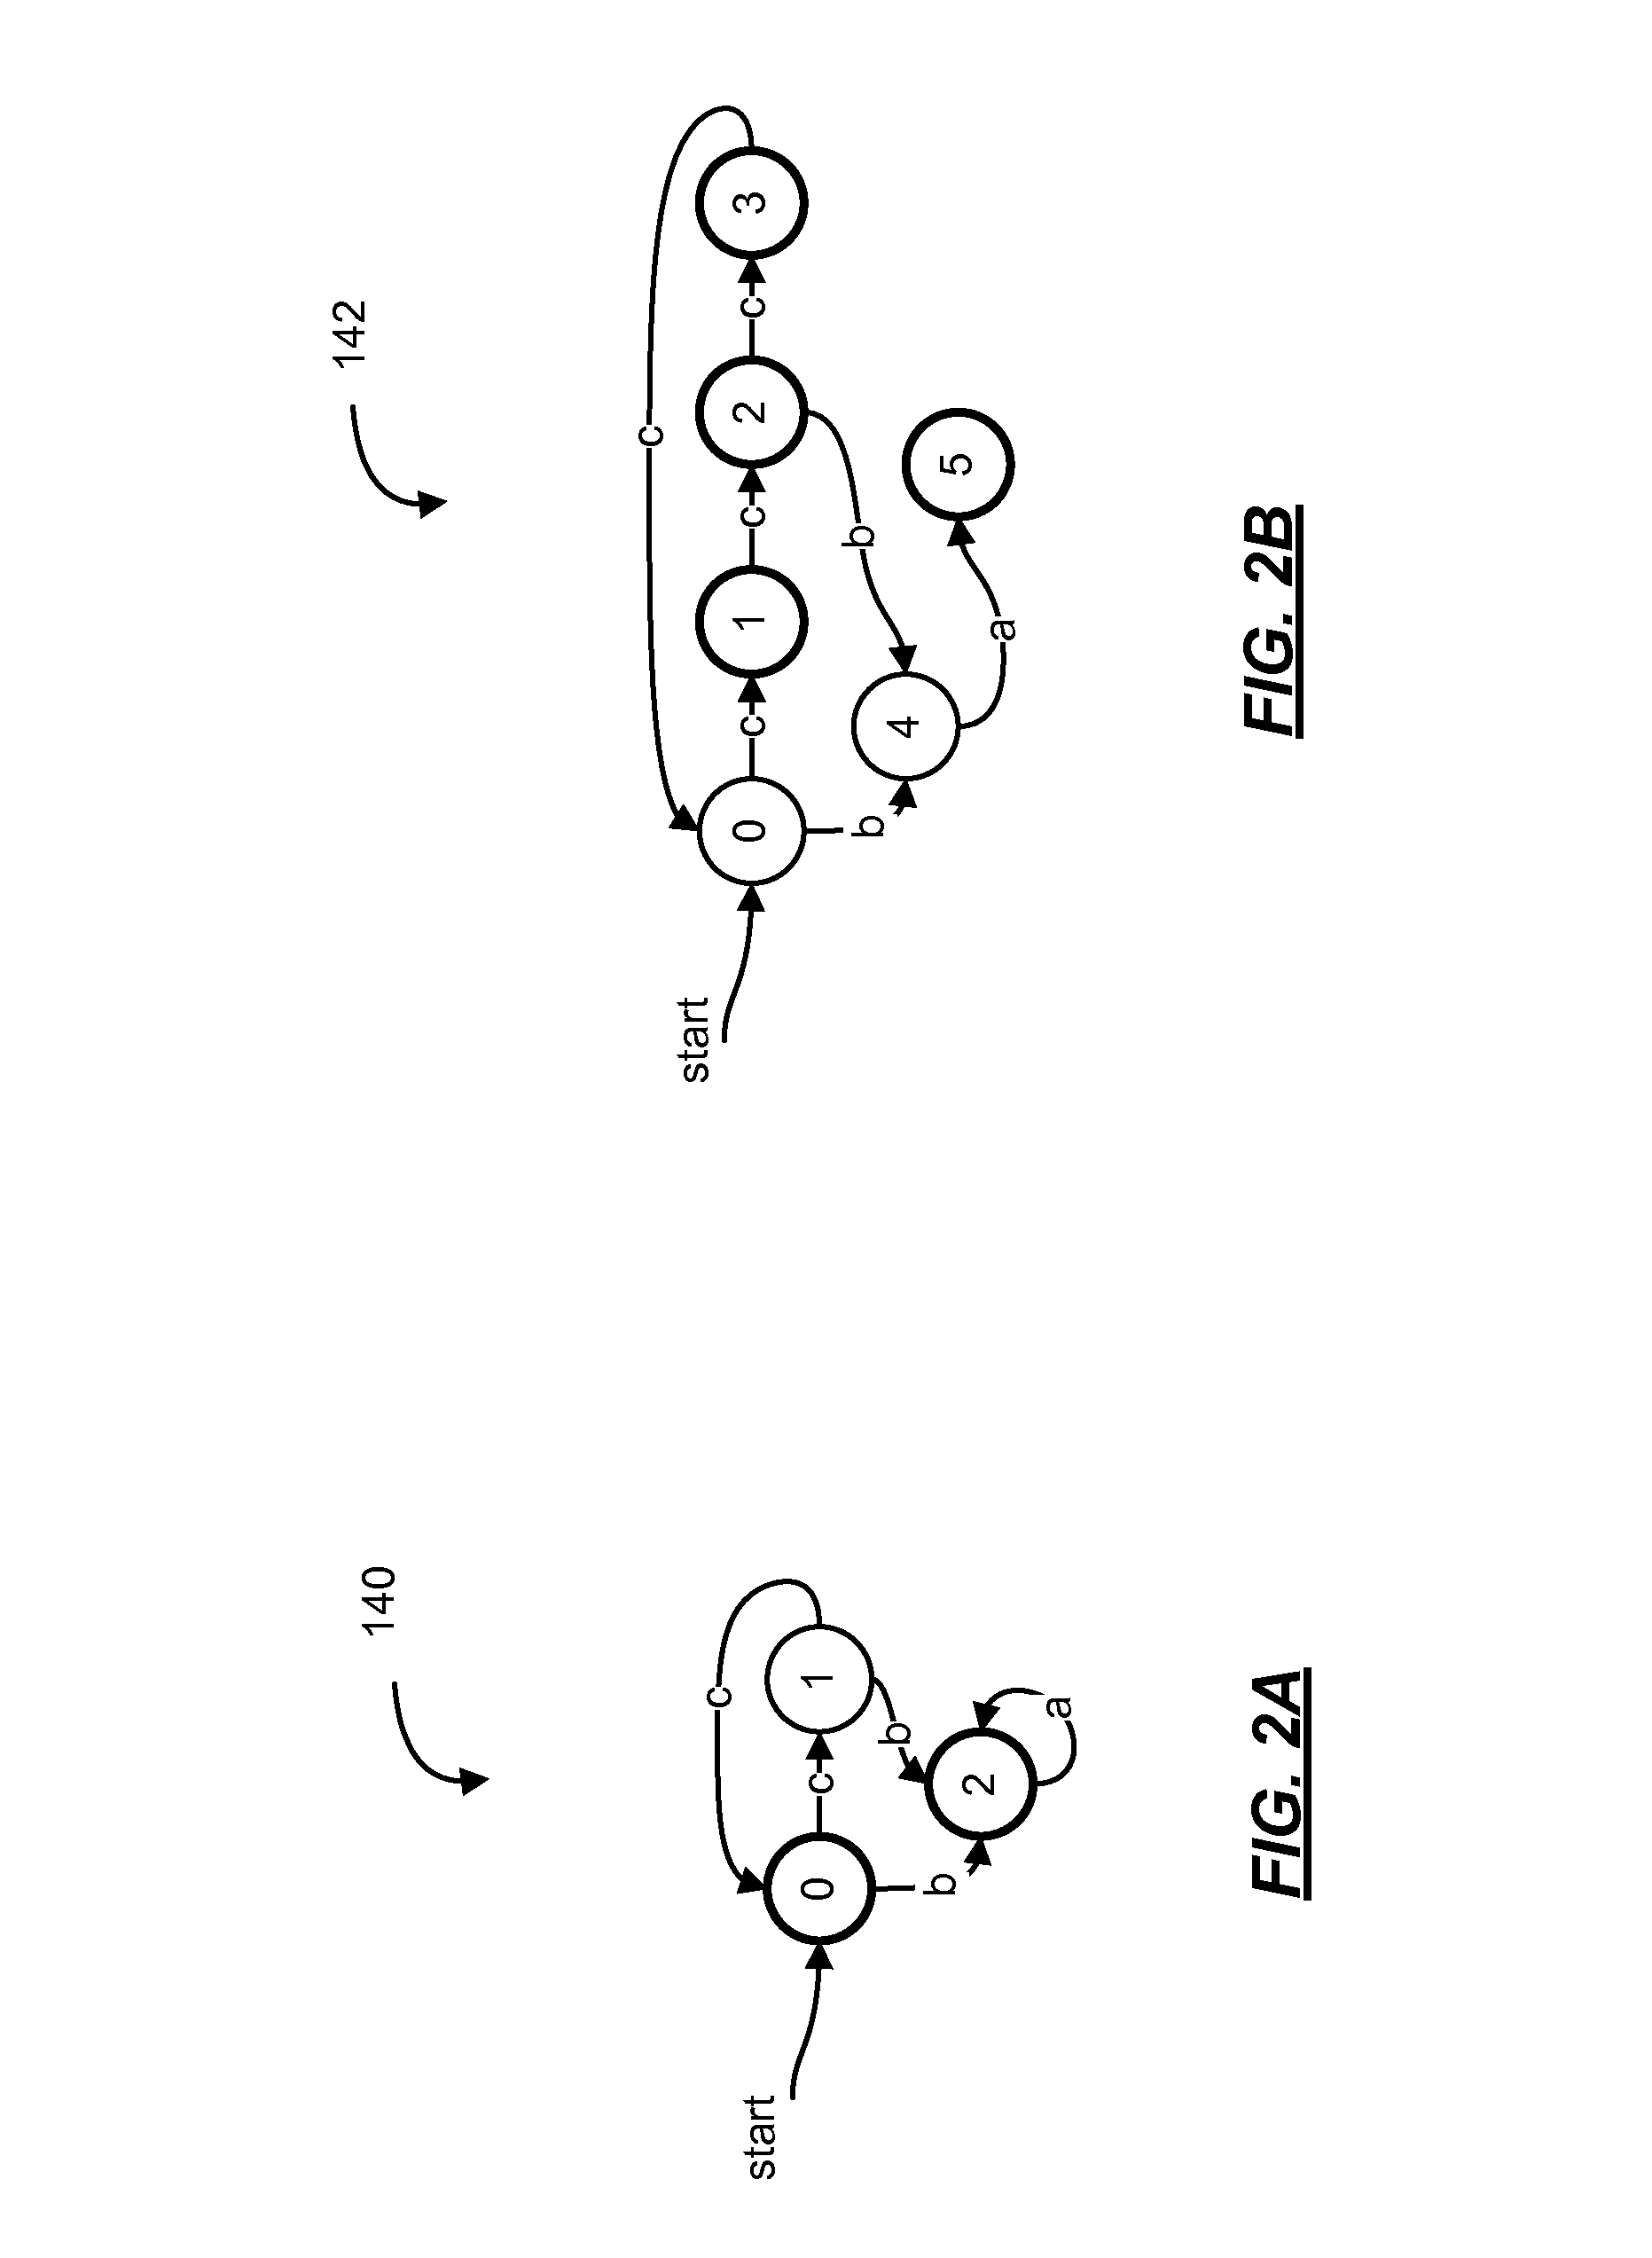 Method of merging and incremental construction of minimal finite state machines